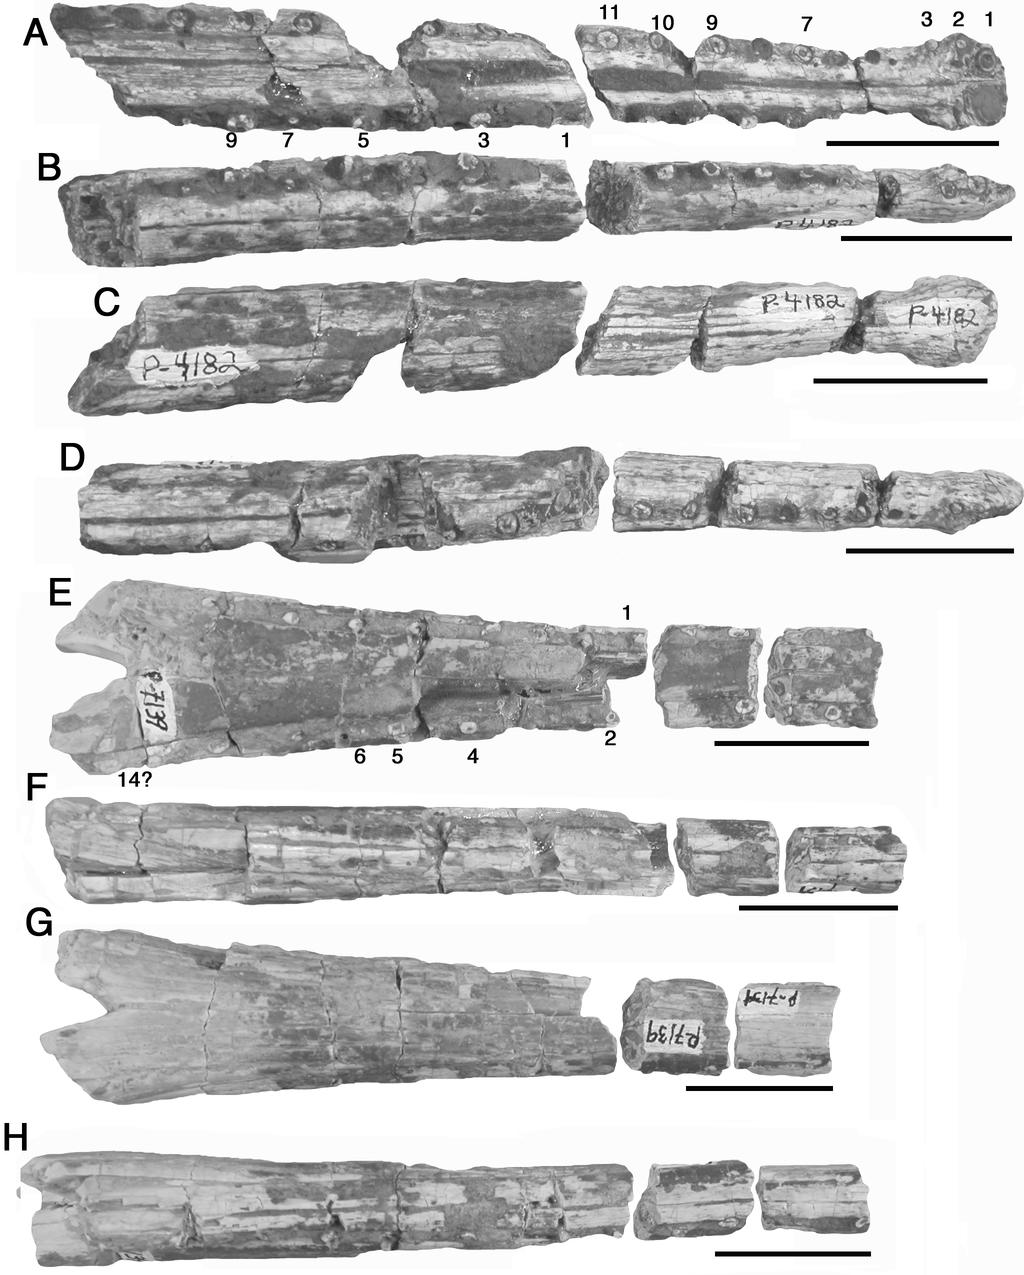 232 FIGURE 4. Phytosaur lower jaw fossils from Bull Canyon (NMMNH P-4182) and Sloan Canyon (NMMNH P-7139) formations, eastern New Mexico.